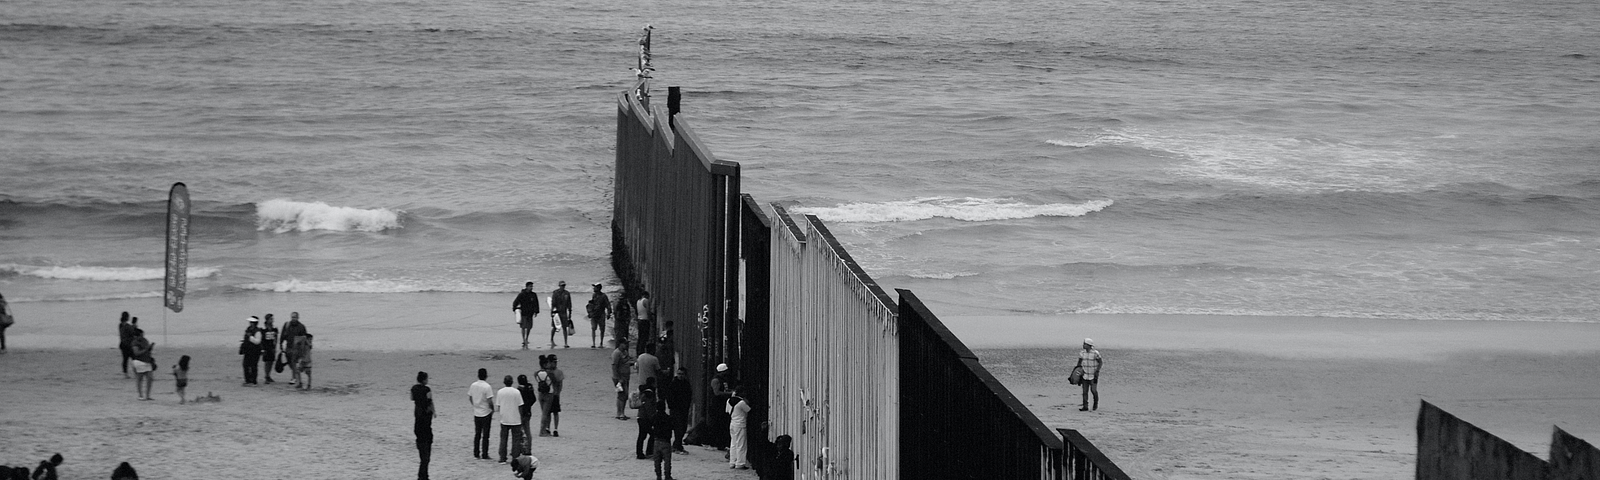 Black-and-white photograph of people on a beach, divided by a tall fence.